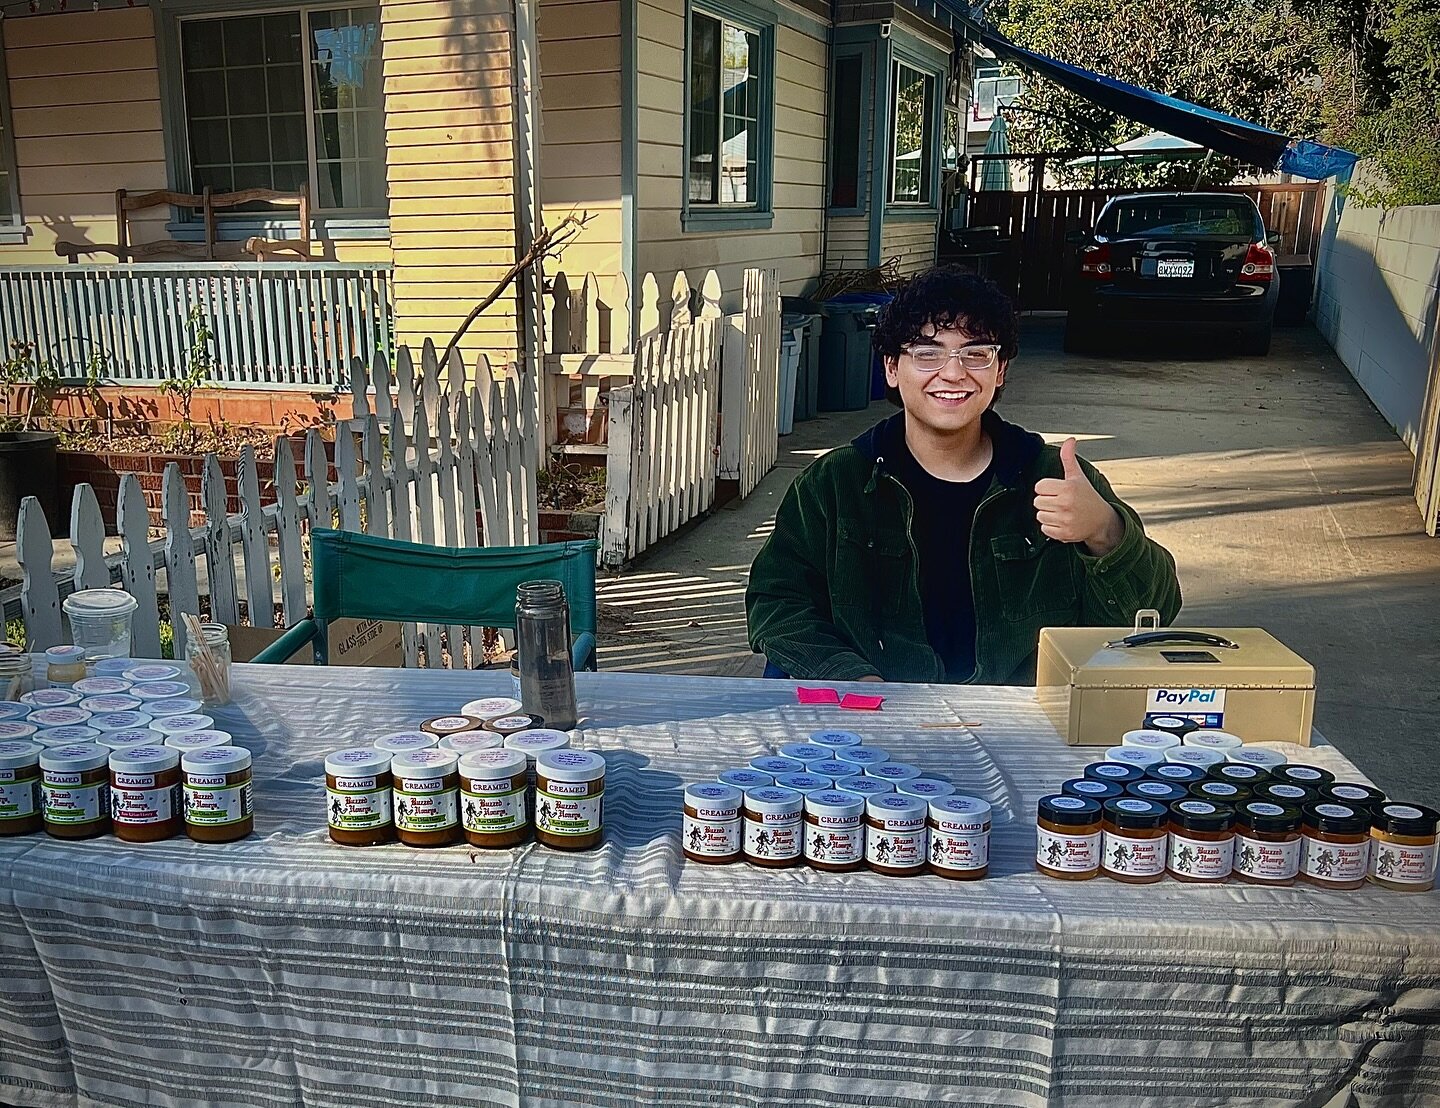 POP-UP #HONEY SALE
in #SouthPasadena

Today - Thursday, Feb 15
Now-dark

704 El Centro St, 91030
#sopas 

#localhoney #rawhoney #flowerpower #pollen included in every jar, no extra charge🌸
(Very very very very tiny amounts of pollen)